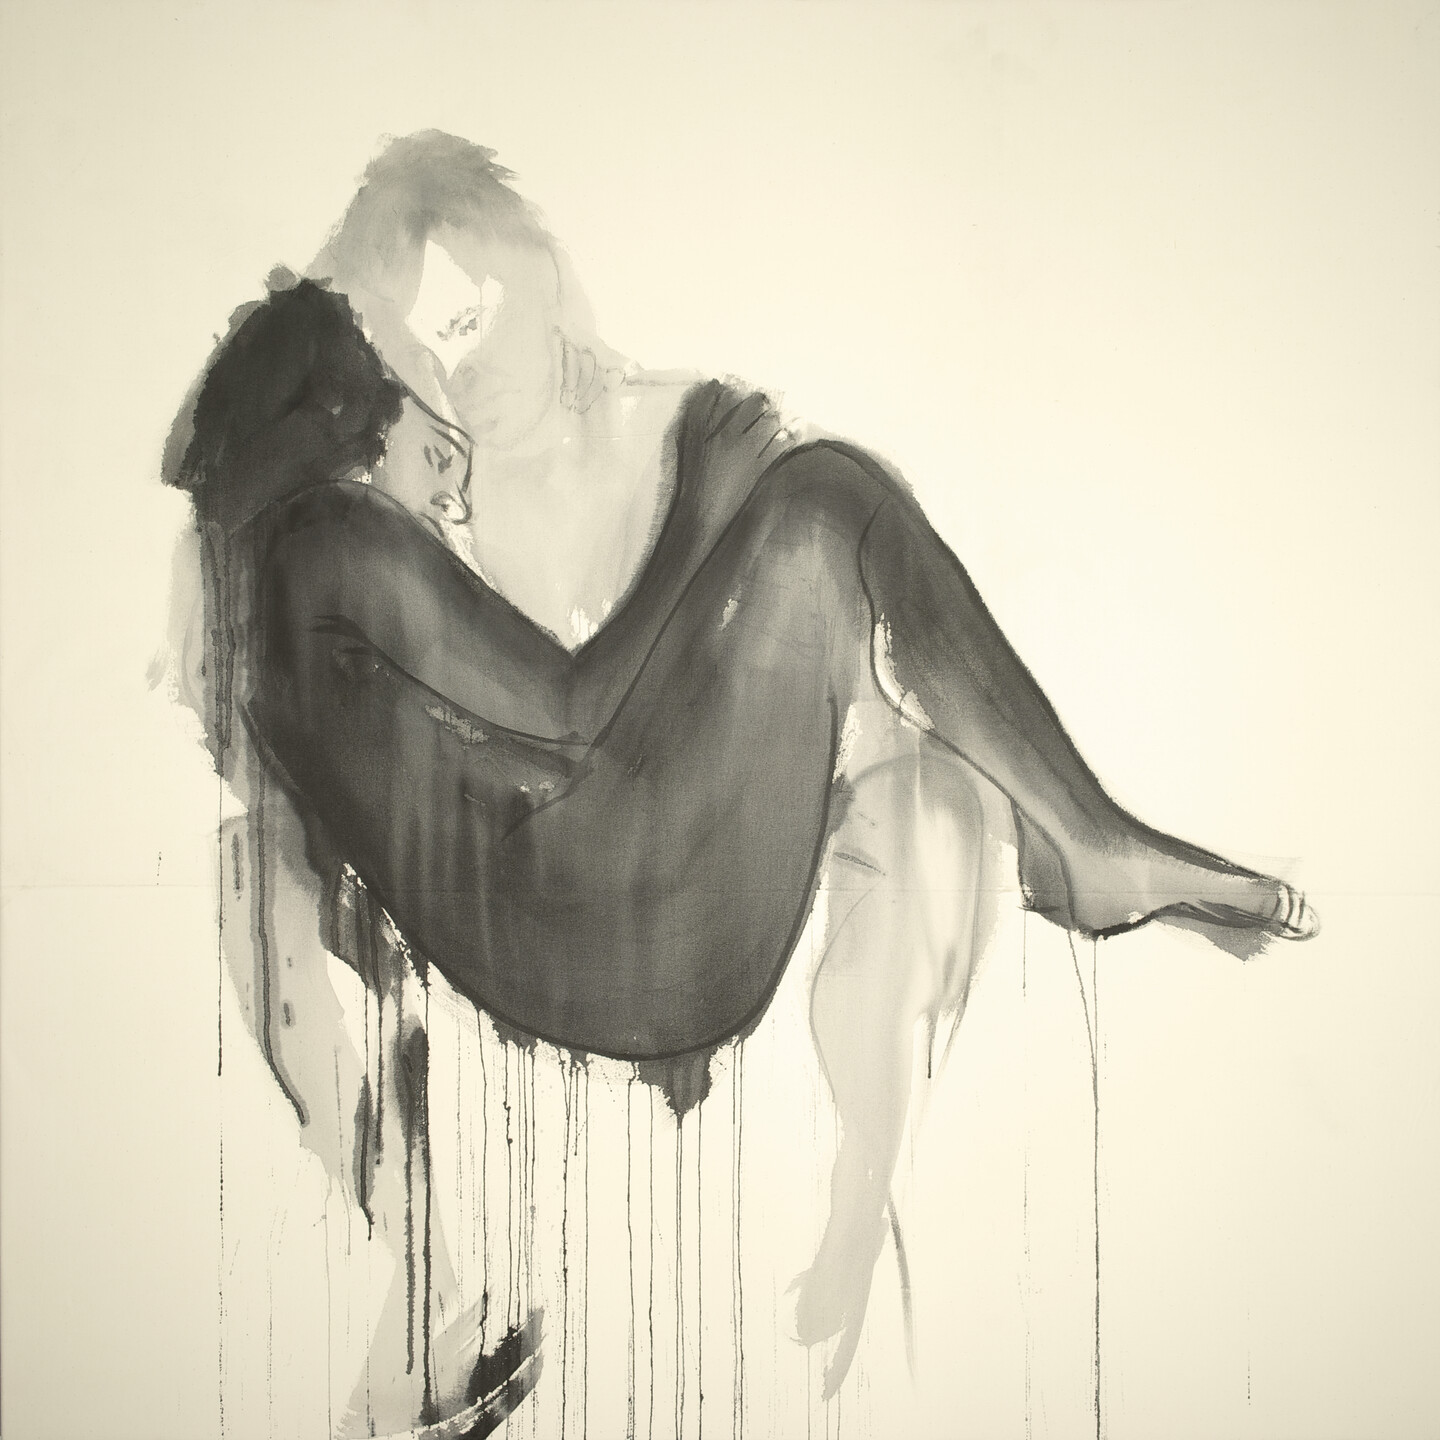 The grey figure of a man fades into the background. Curled up in the man's arms, a woman's figure is painted in black and pops against the light background. Streaks of black paint drip from her figure to the bottom of the canvas.